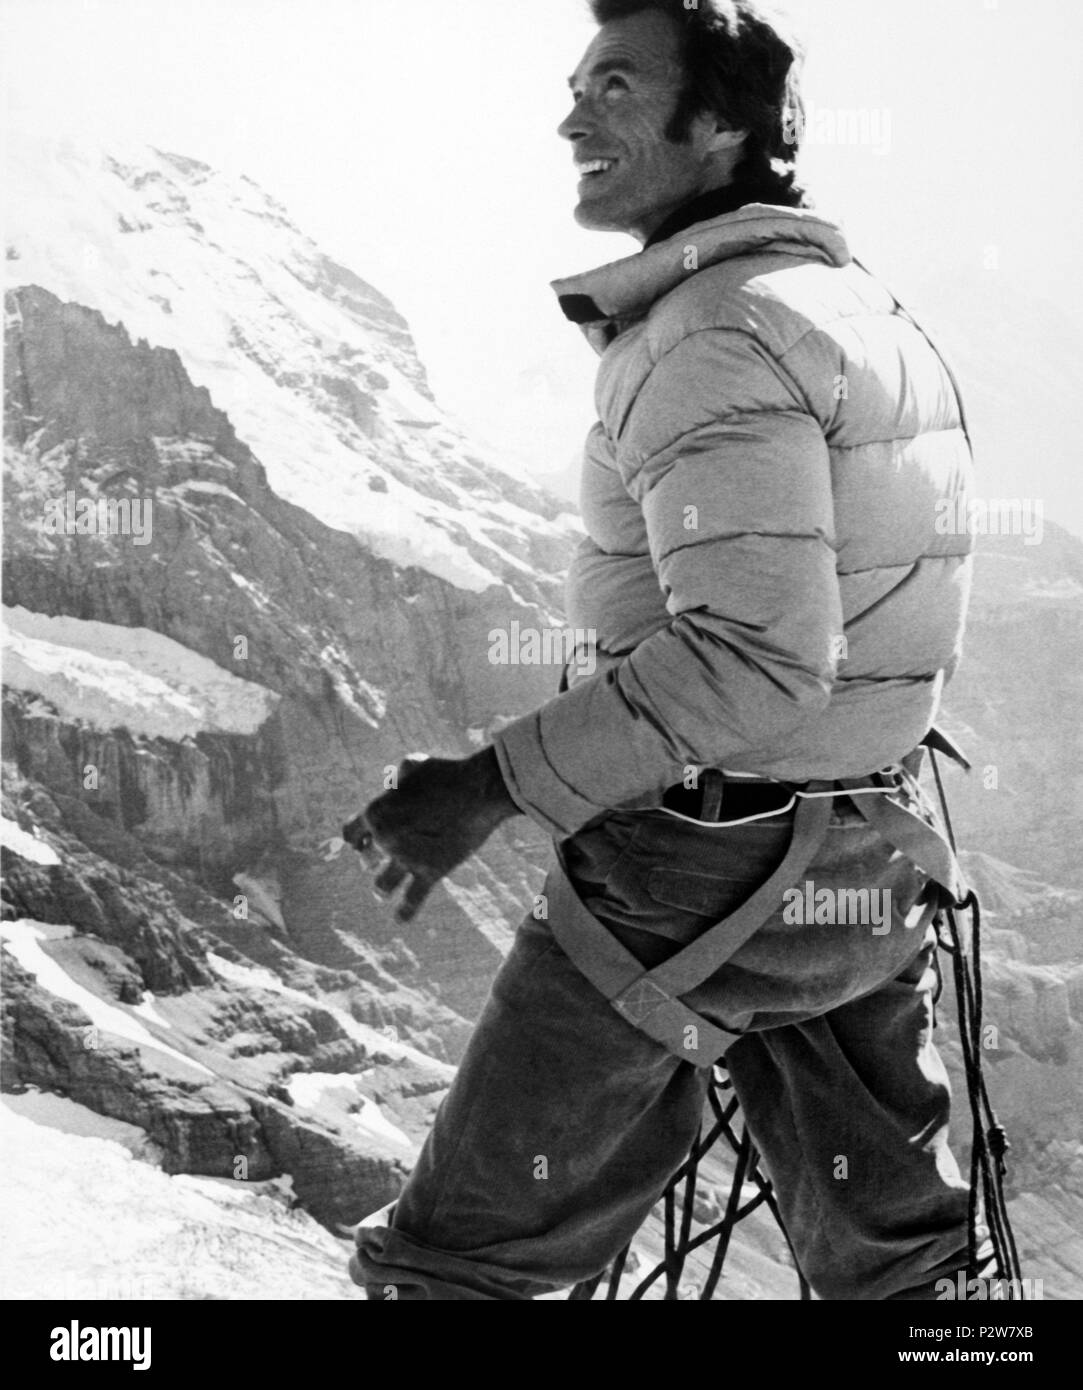 Clint Eastwood's Climbing Outfit in The Eiger Sanction » BAMF Style